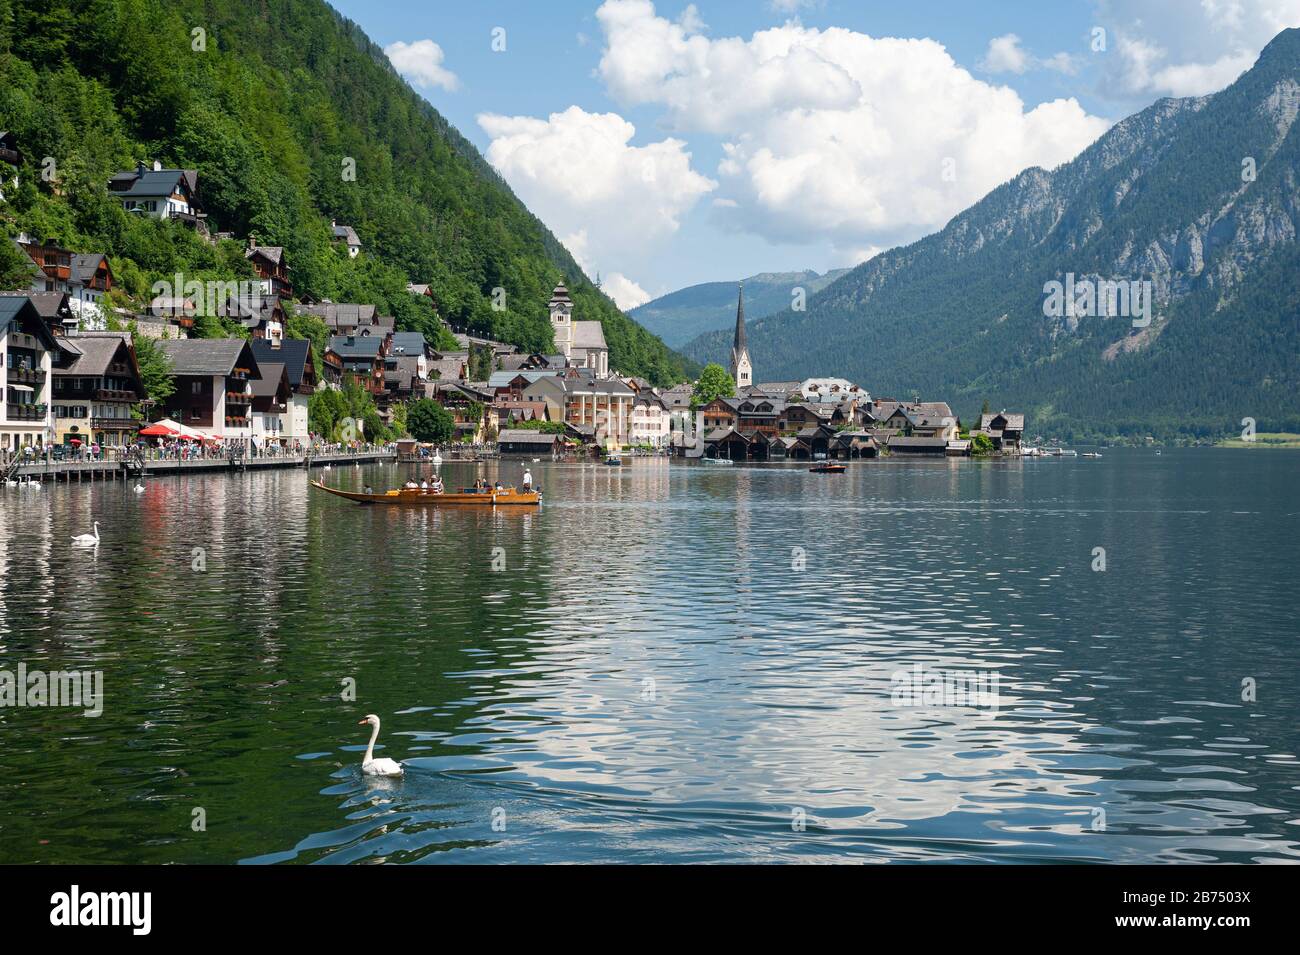 18.06.2019, Hallstatt, Upper Austria, Austria, Europe - View from the shore of the lake Hallstaetter See to the village at the mountainside. The place is a favorite travel destination of Chinese and exists as a replica in the Guangdong province in China. [automated translation] Stock Photo